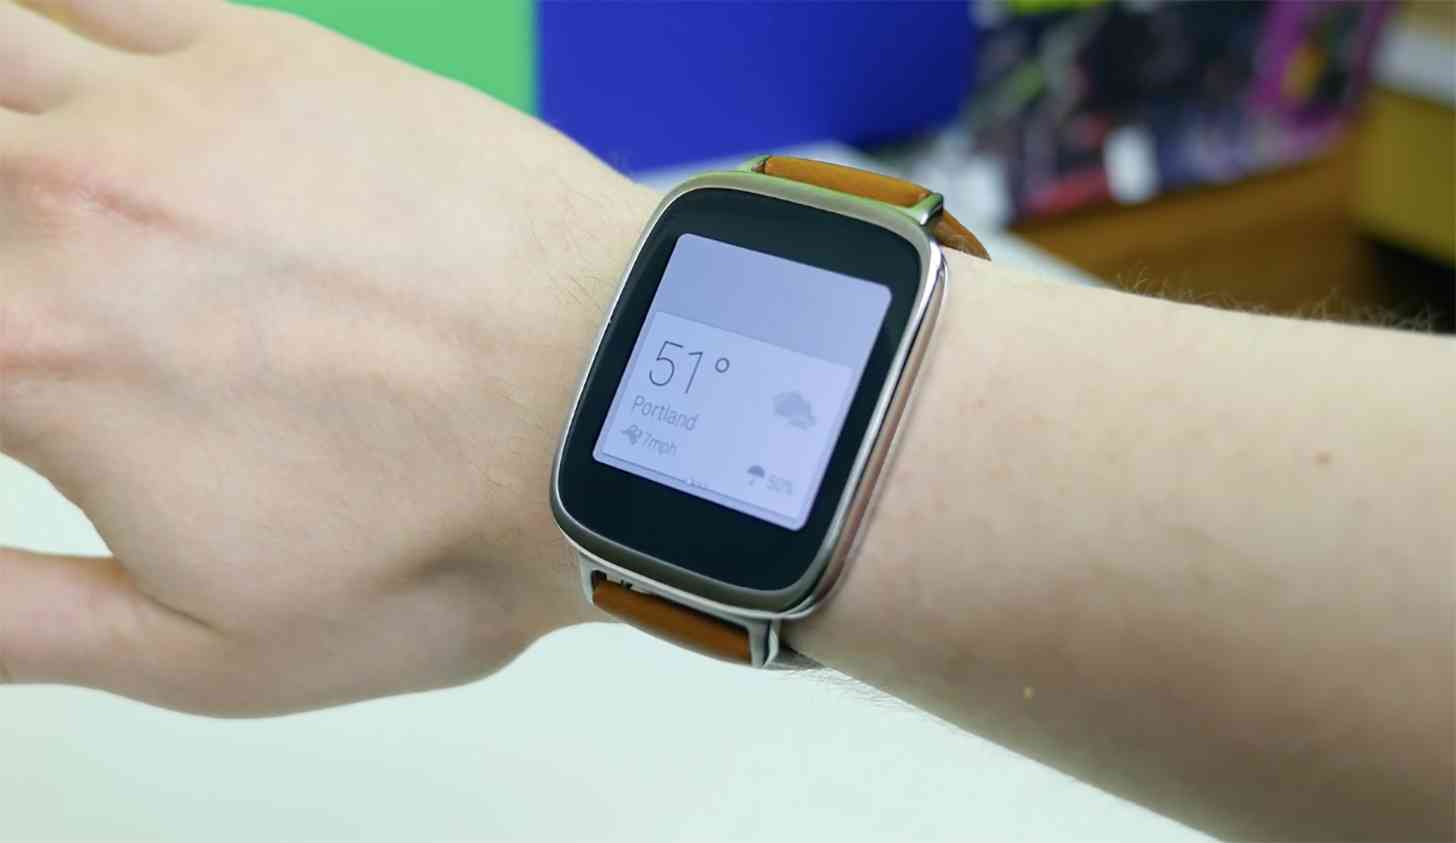 ASUS ZenWatch hands-on review